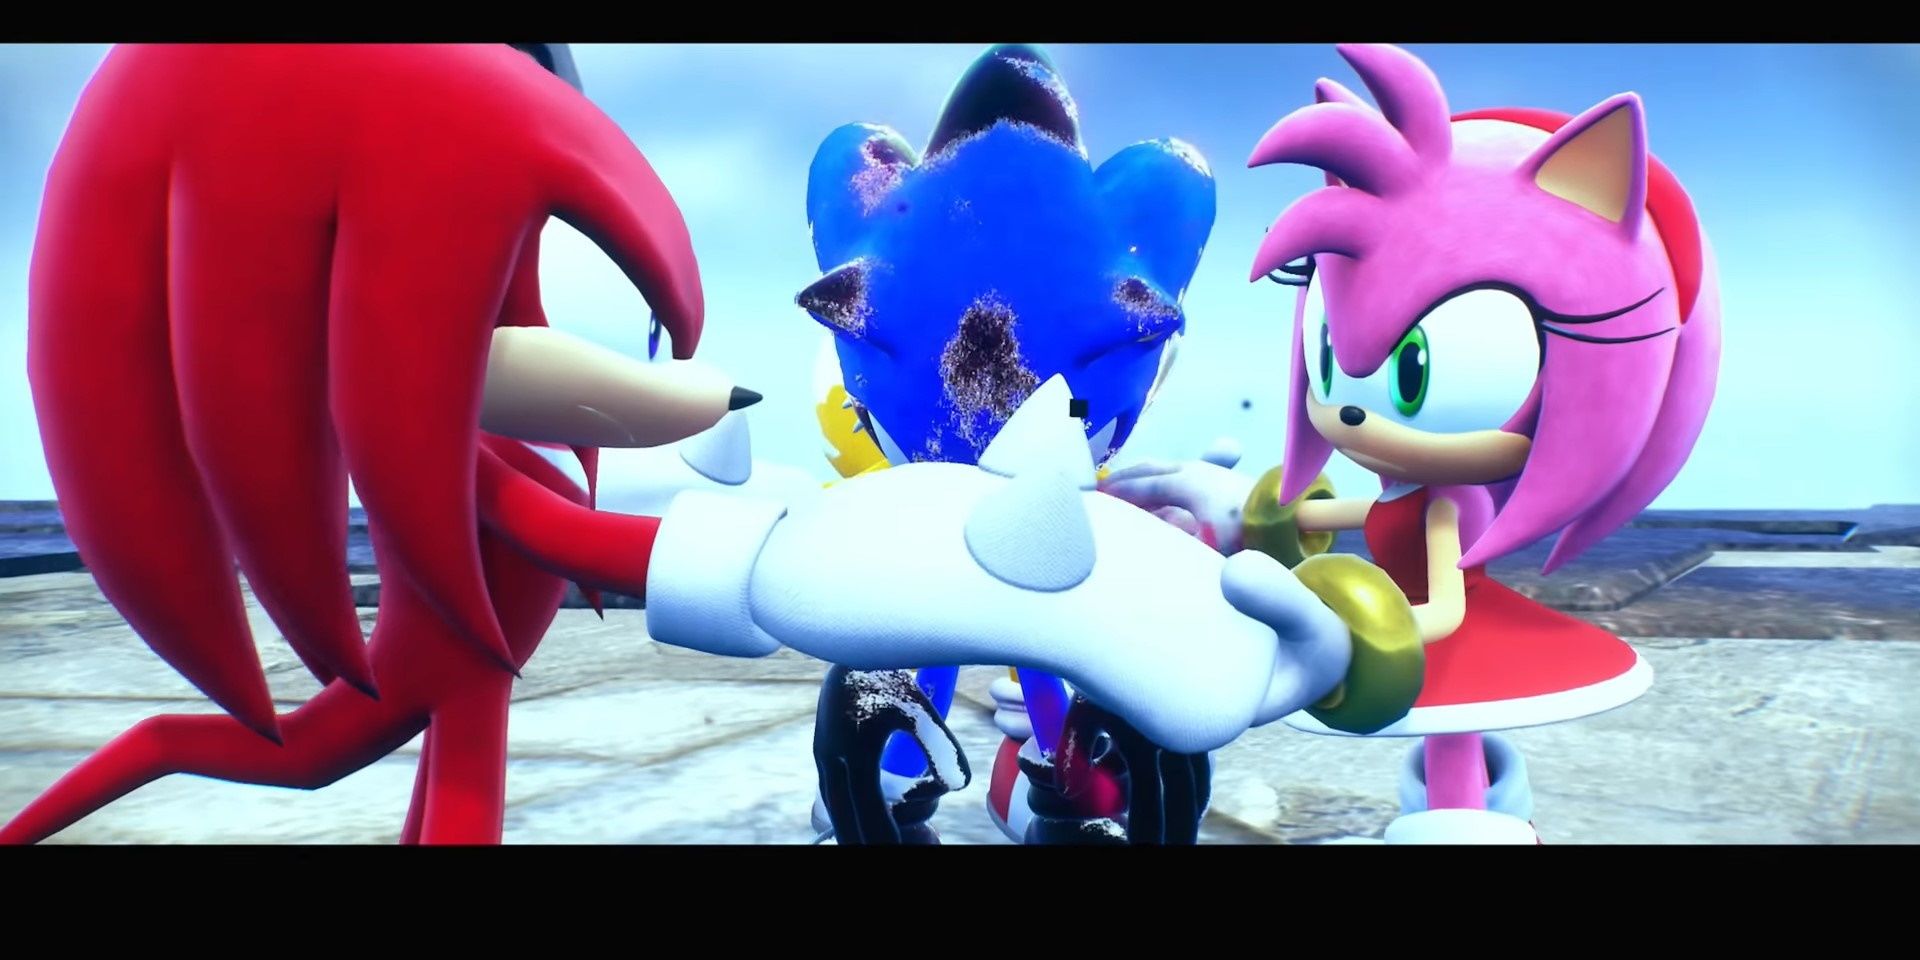 Sonic's friends hug around a wounded Sonic